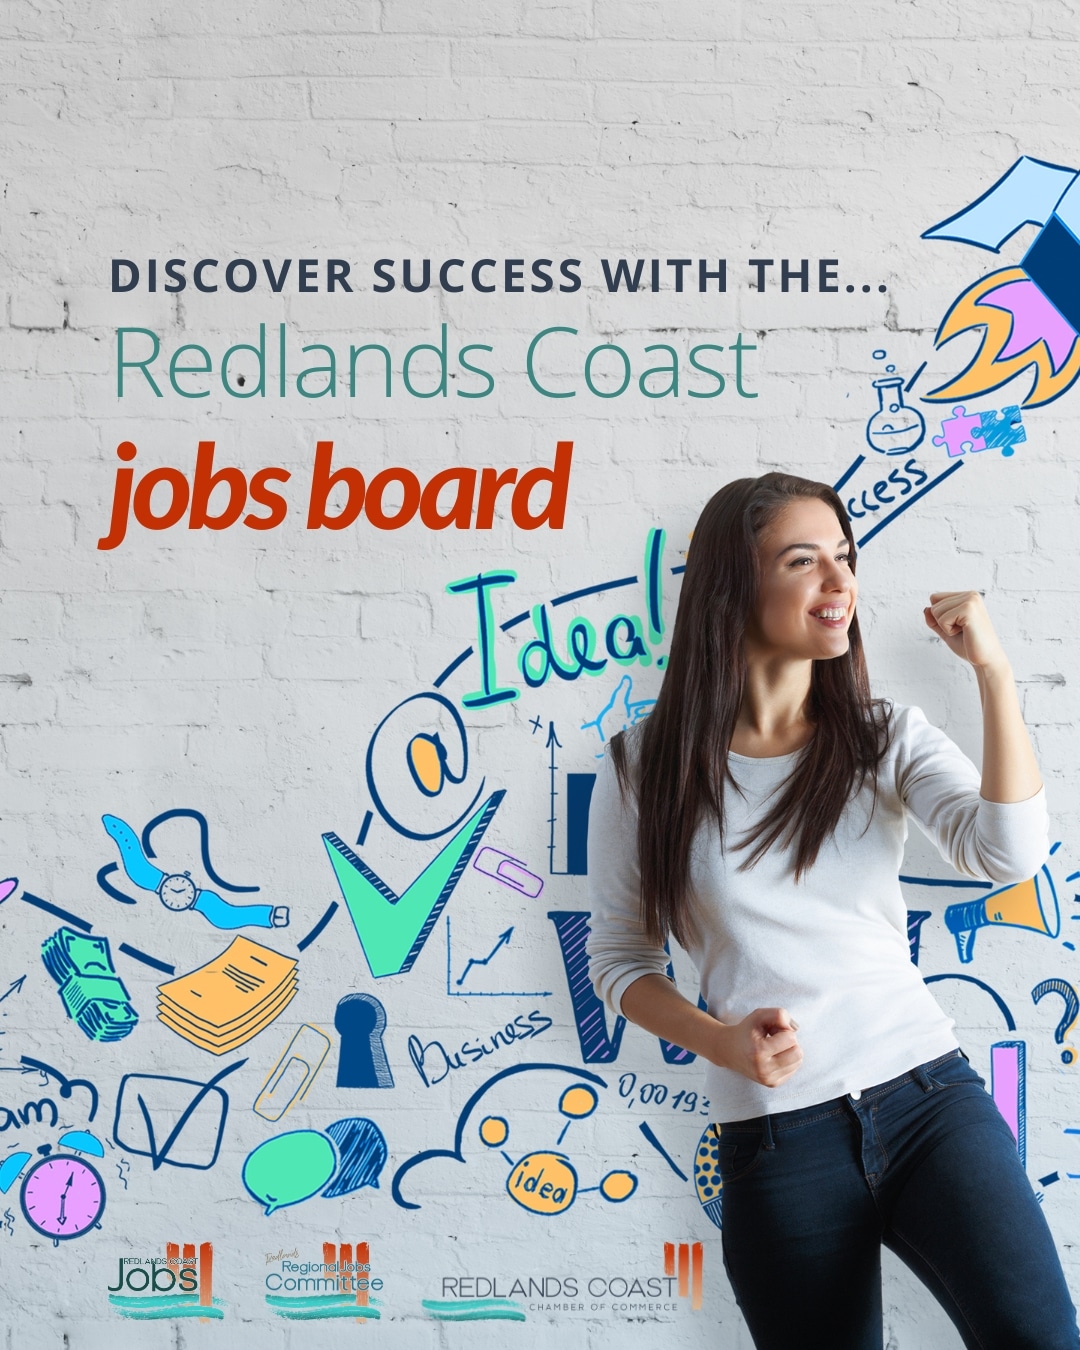 Discover Success with the Redlands Coast Jobs Board